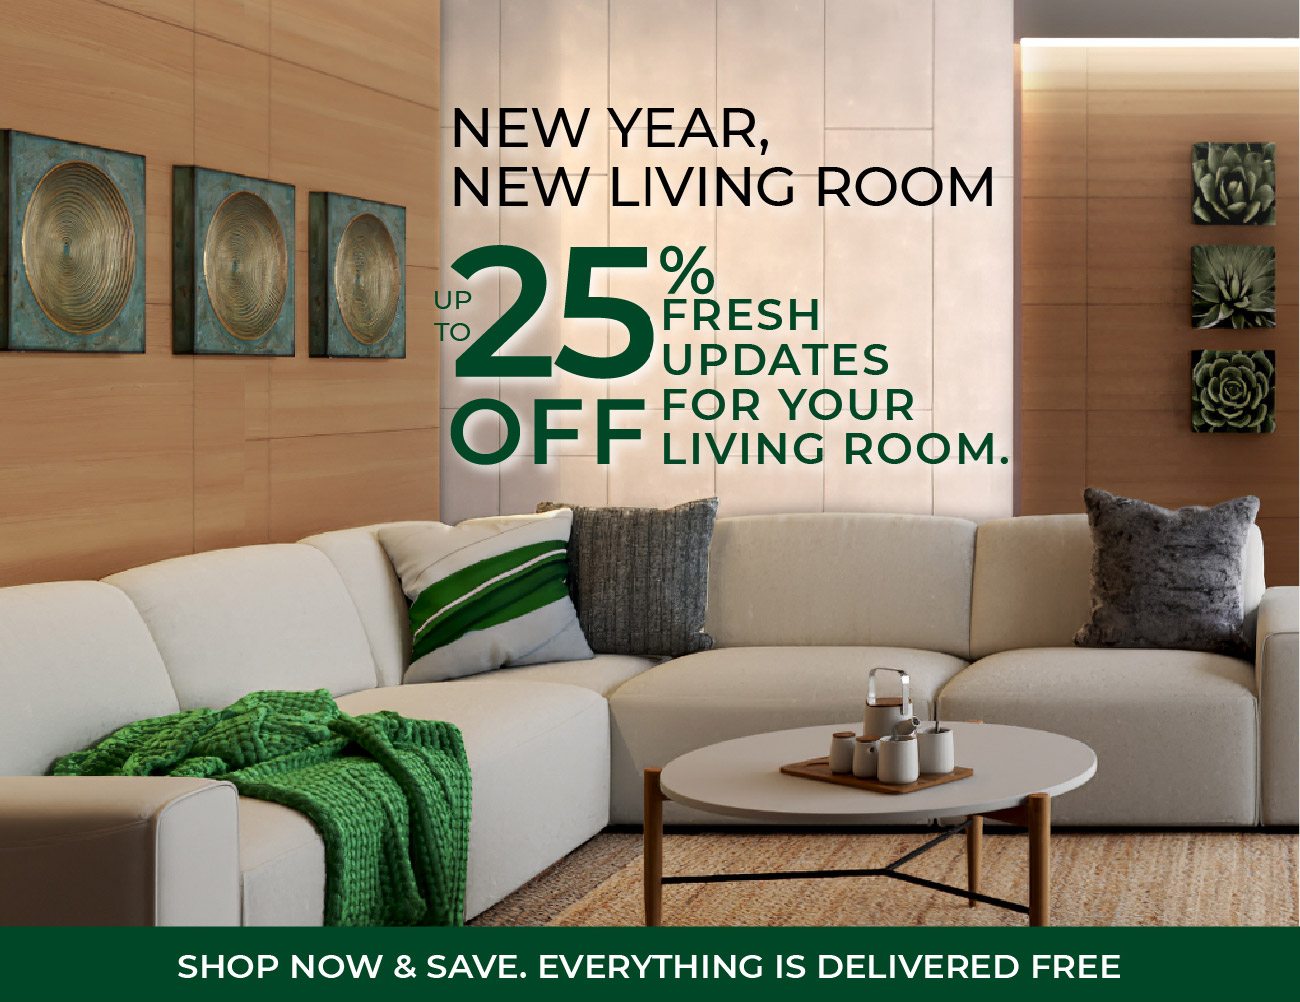 New Year, New Living Room | Up to 25% Off fresh updates for your living room. | Shop Now!